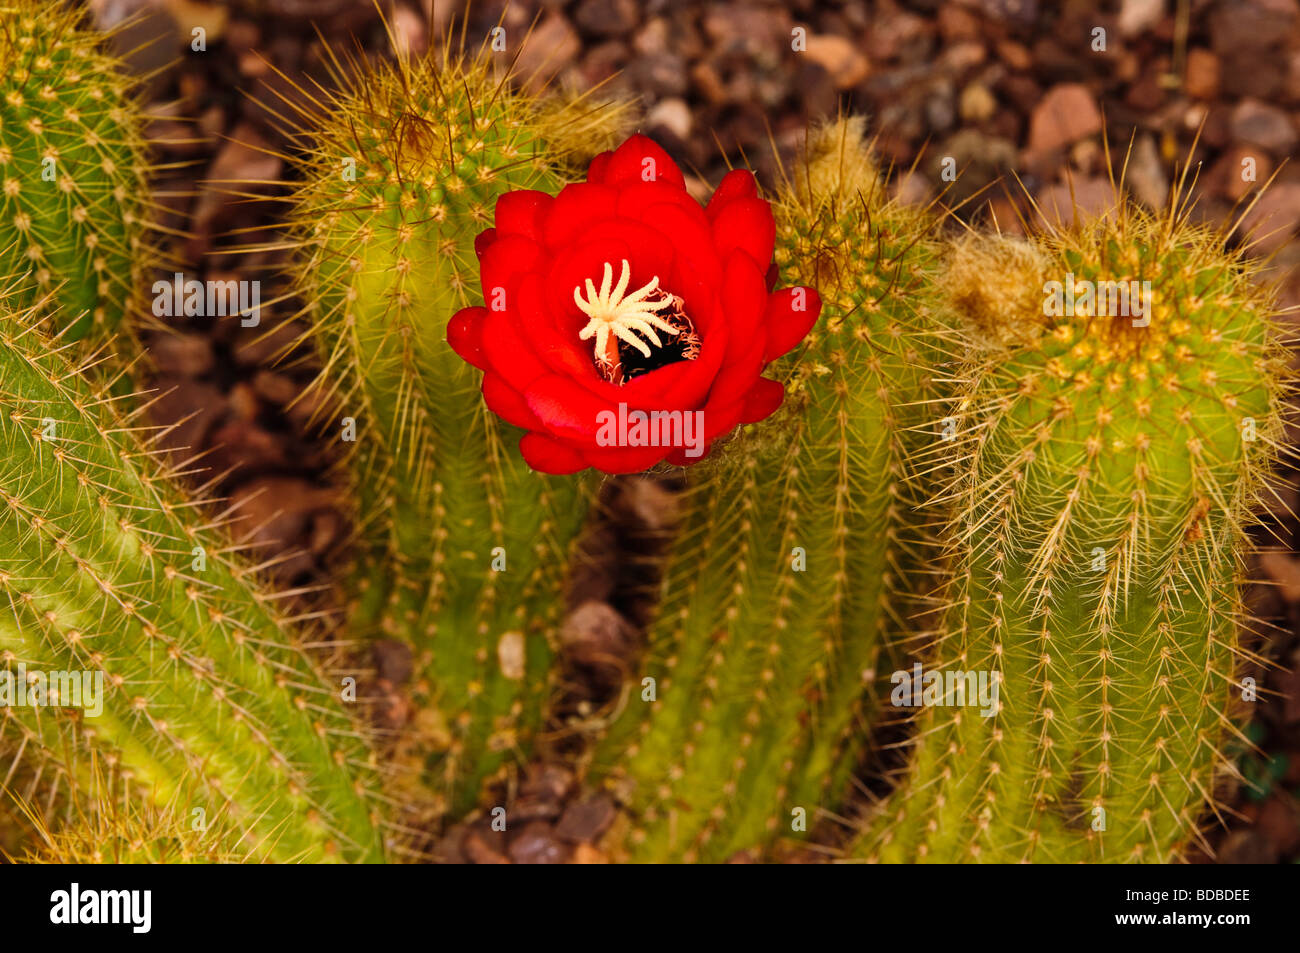 Red Torch cactus in bloom Stock Photo